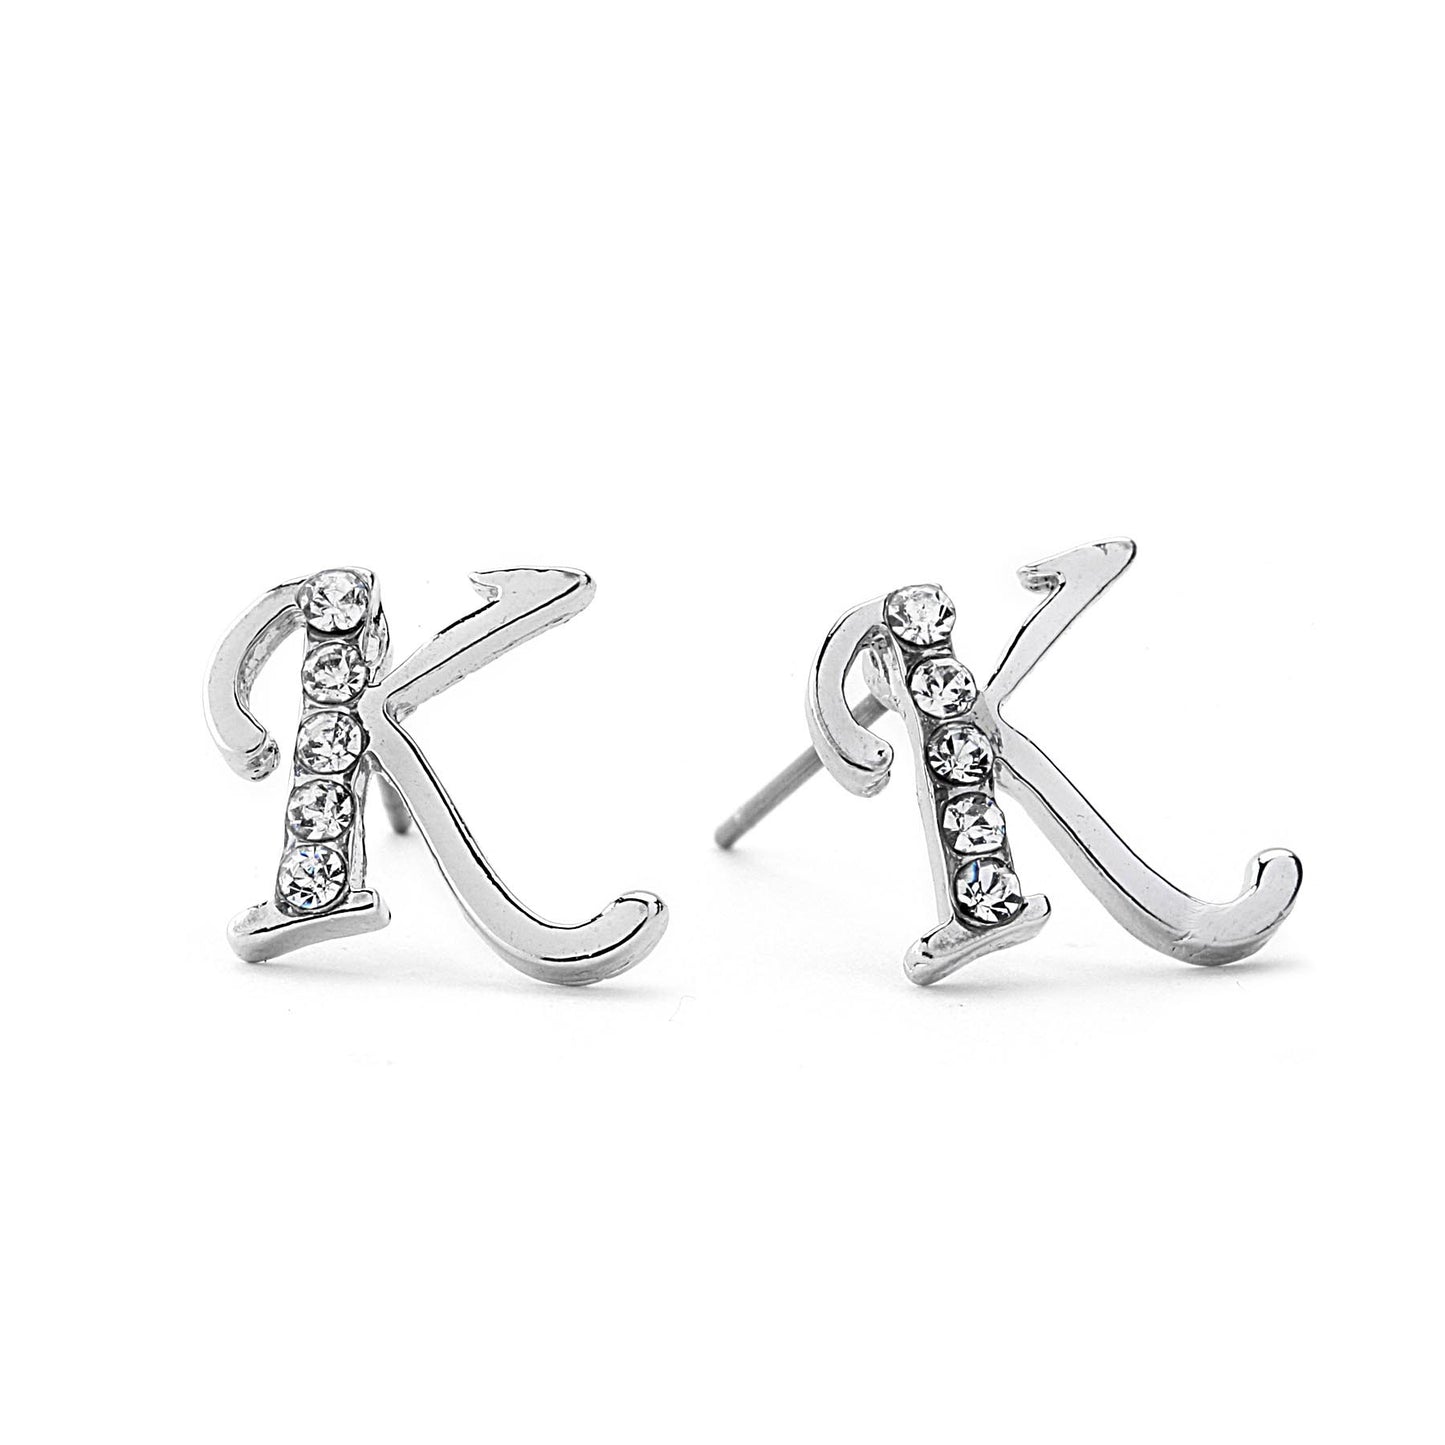 Initial Earrings with CZ Accents